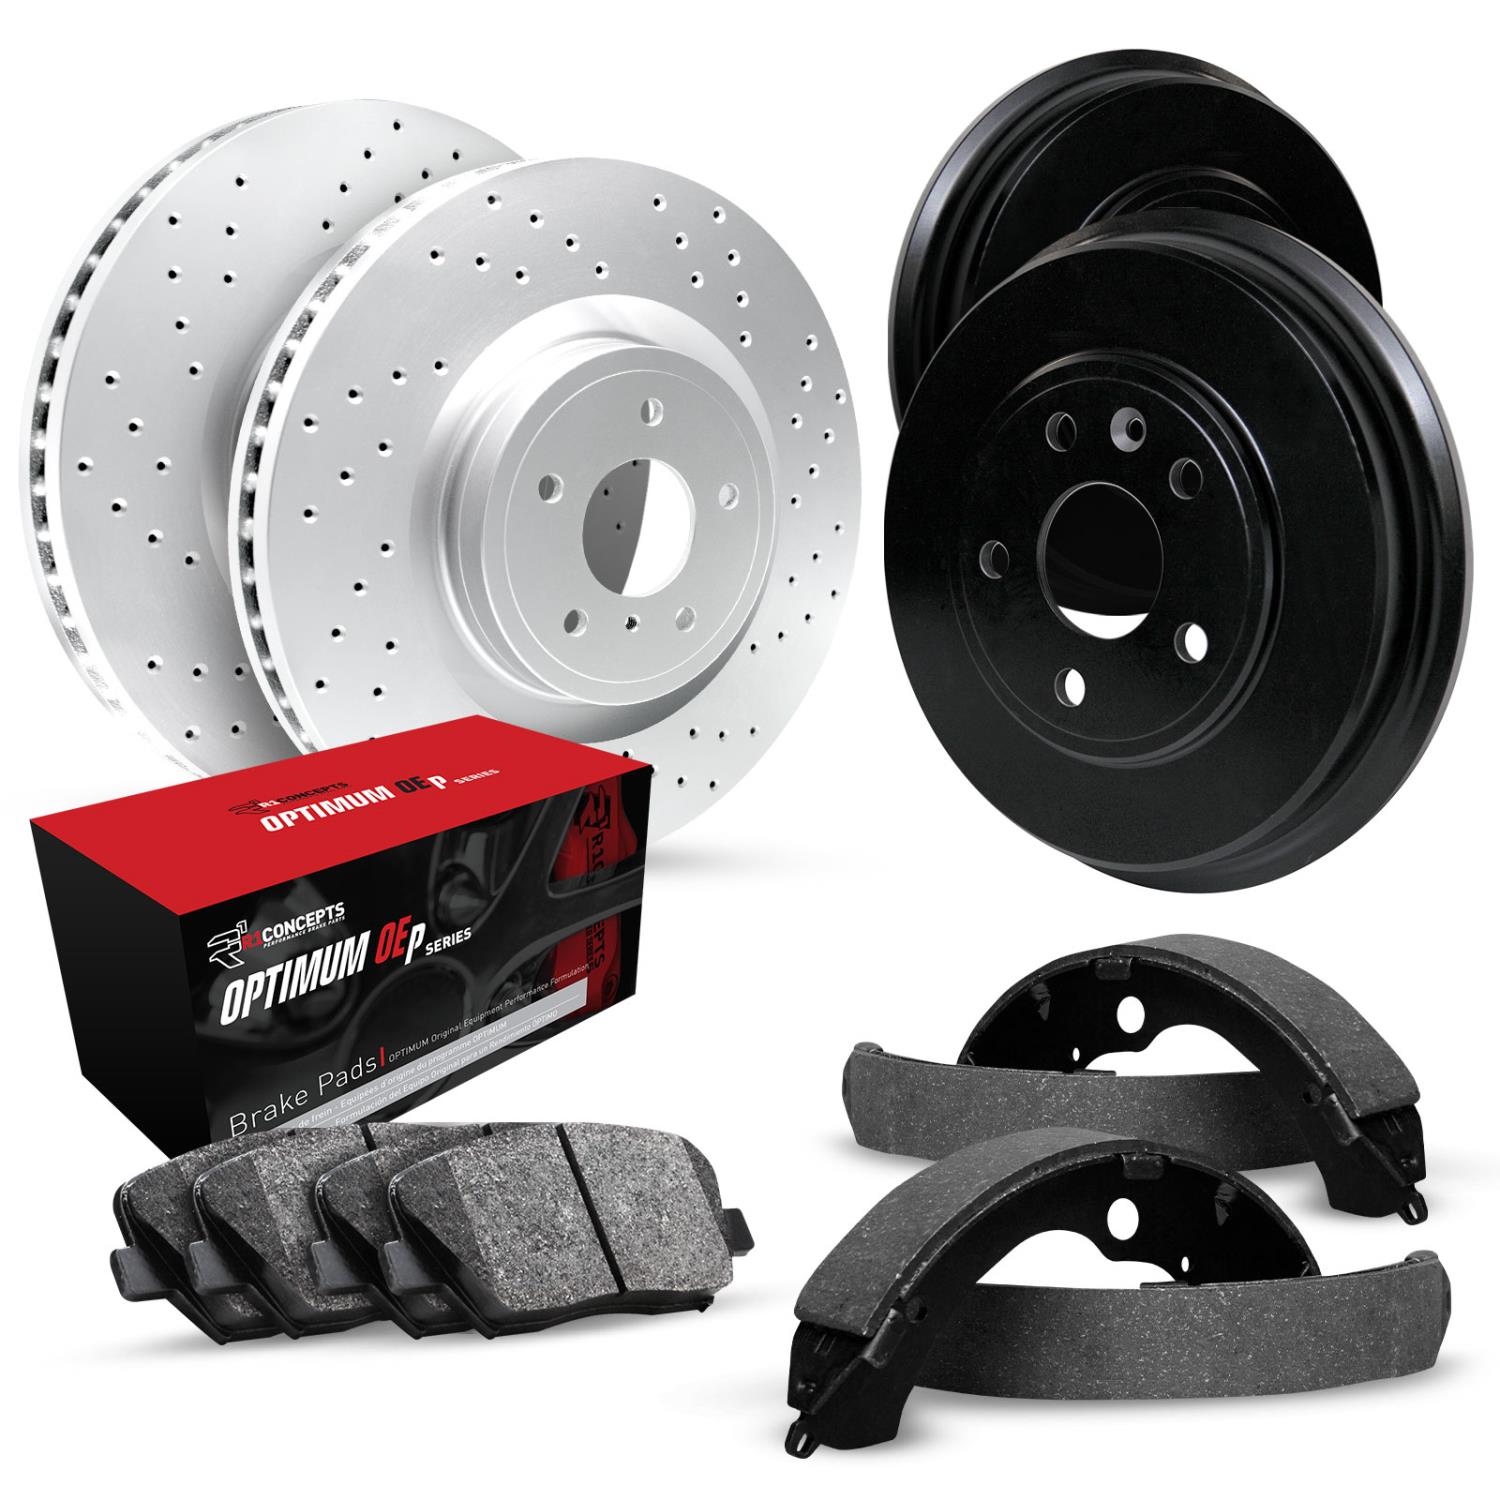 GEO-Carbon Drilled Brake Rotor & Drum Set w/Optimum OE Pads & Shoes, 2007-2017 Infiniti/Nissan, Position: Front & Rear